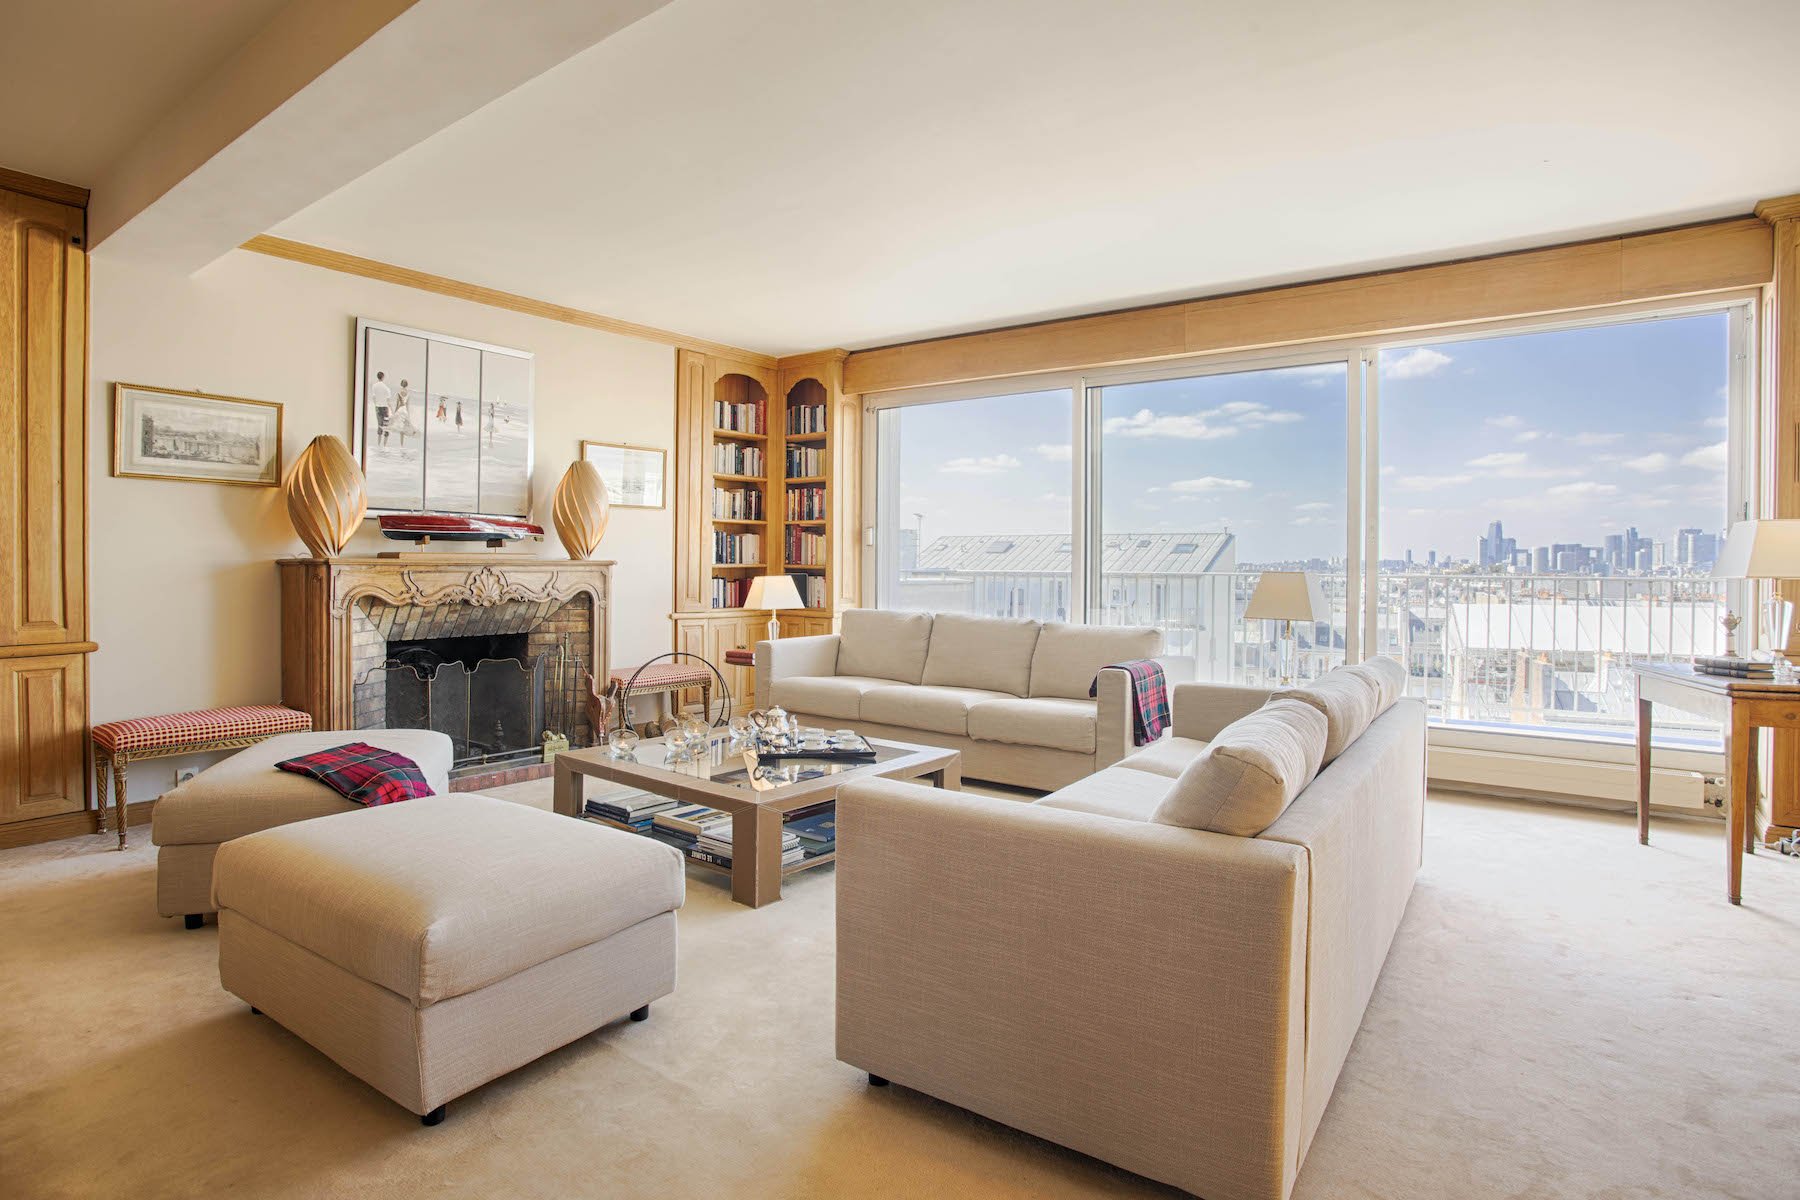 Exceptional apartment in the center of Paris with rooftop view of the Eiffel Tower